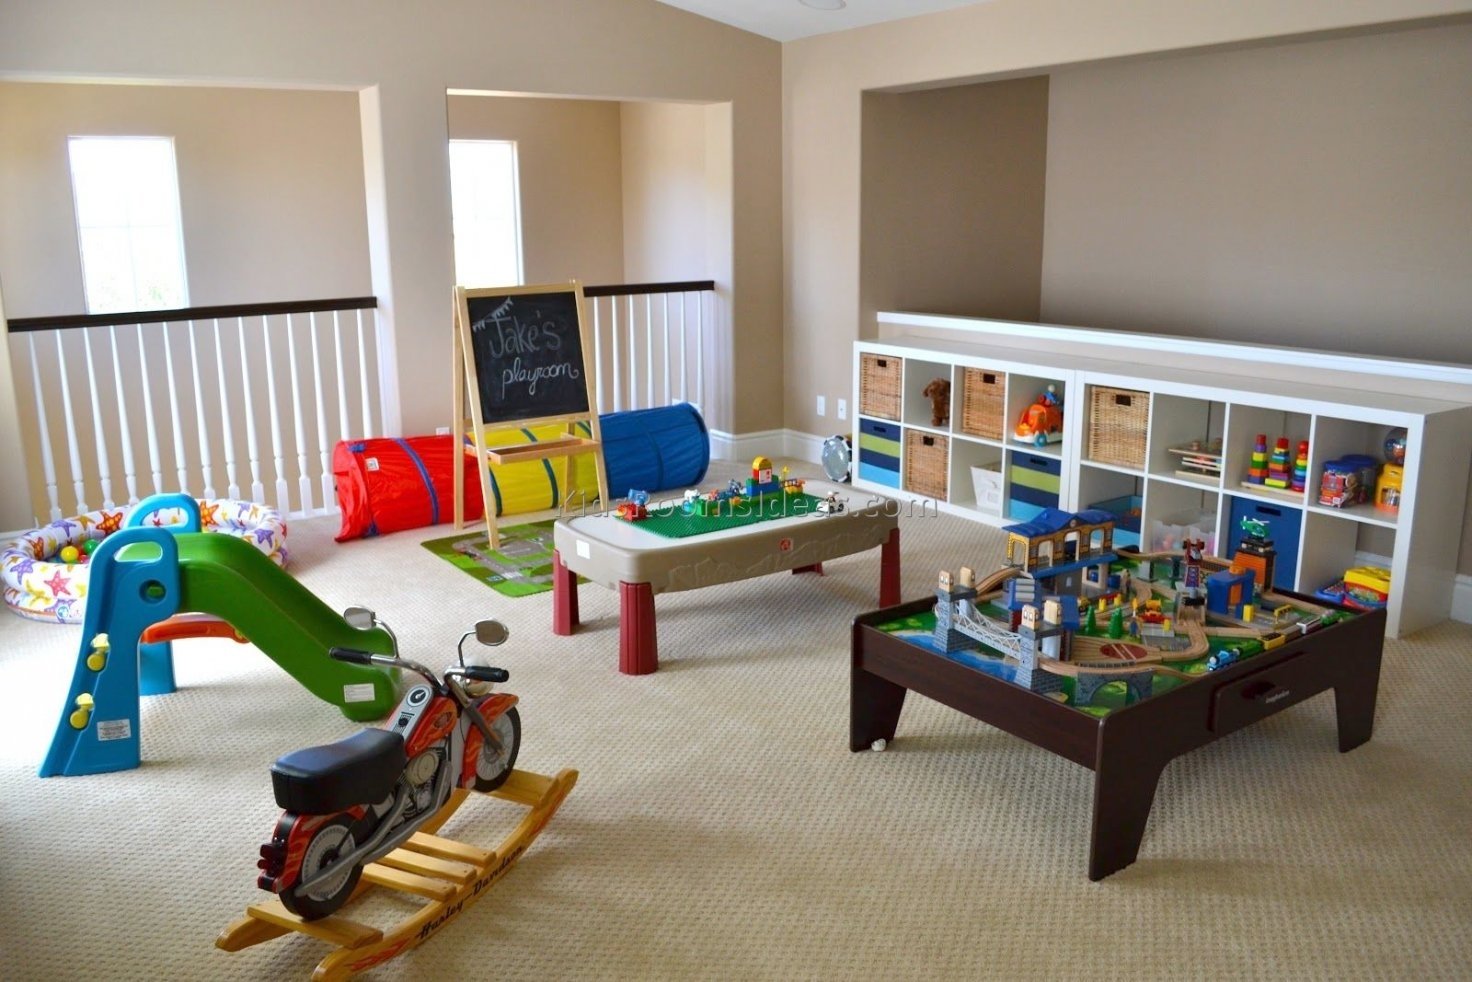 10 Gorgeous Game Room Ideas For Kids boys game room ideas kids game room ideas game rooms for kids and 2023